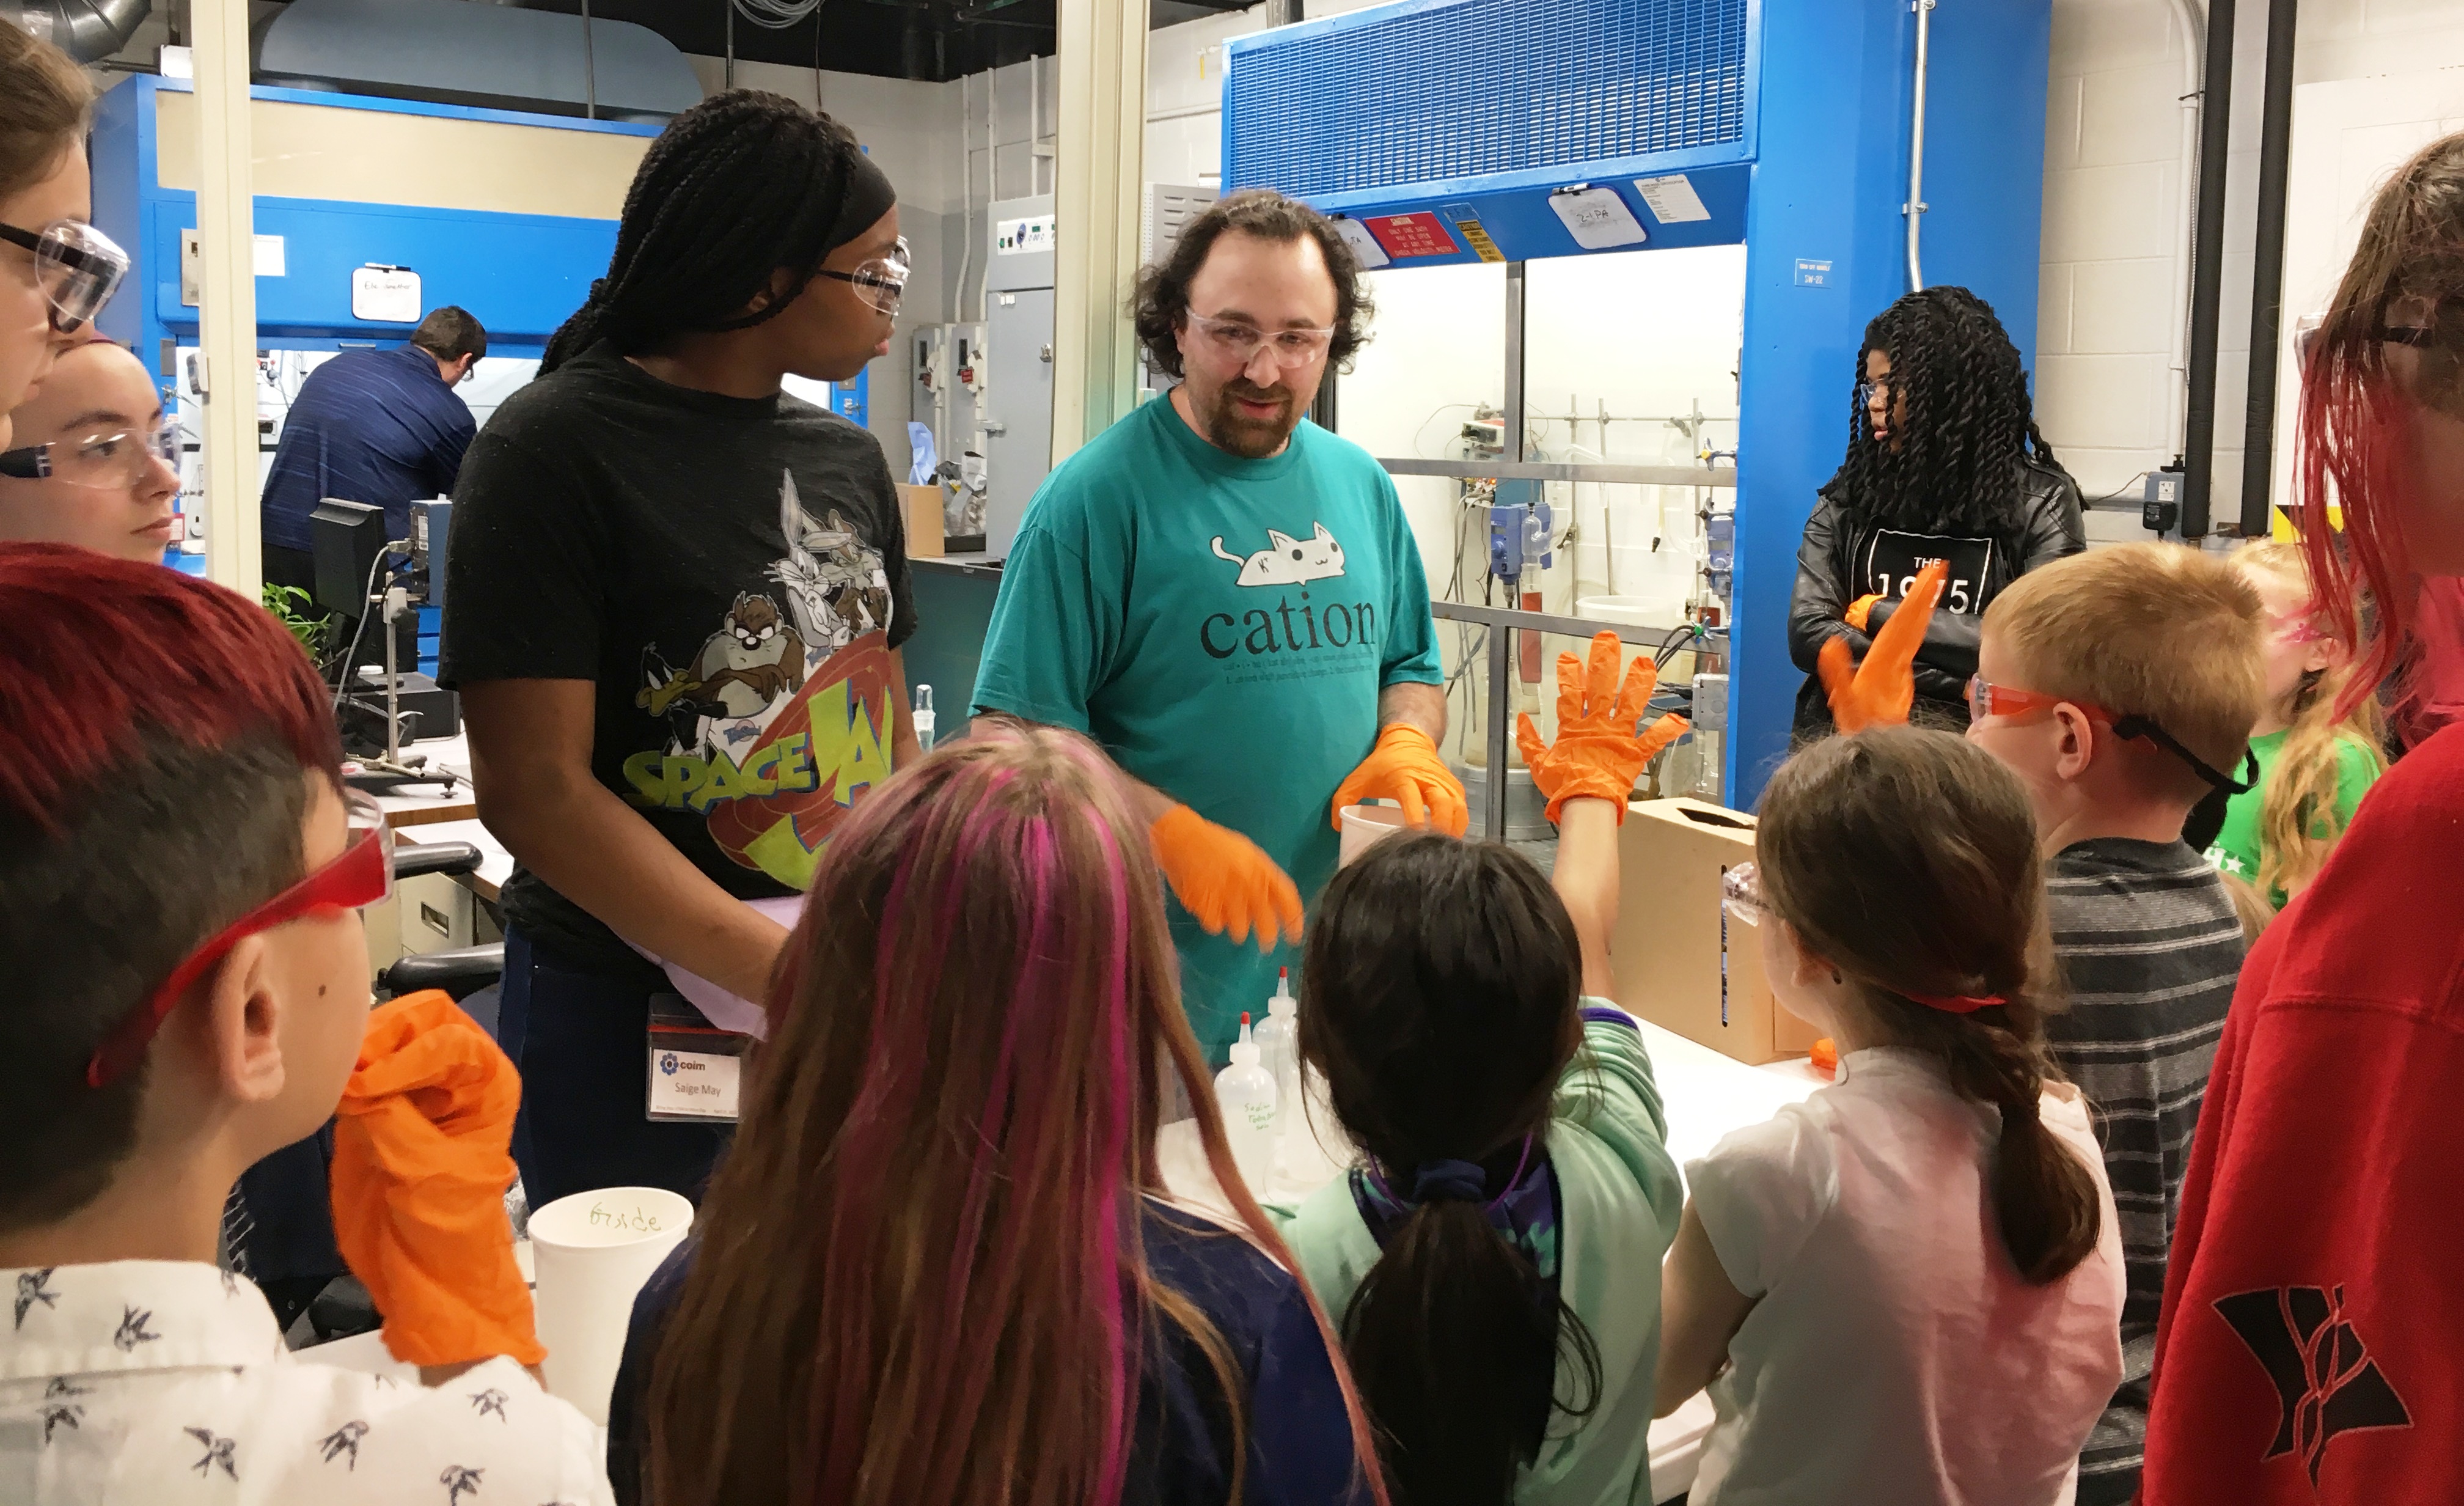 R&D Chemist, Brian Gelfond, explains to the kids the process of making slime!